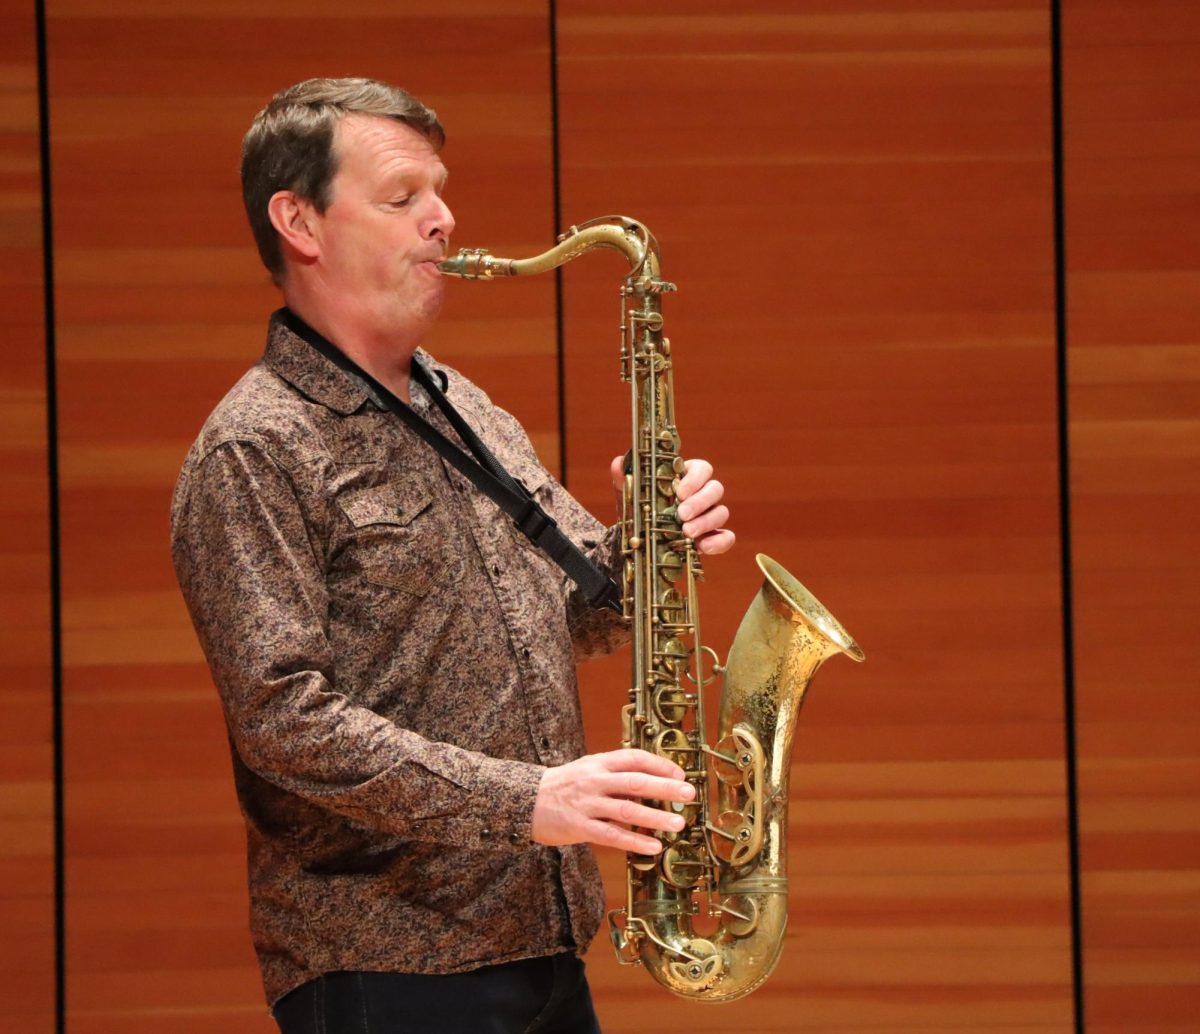 Saxophonist Matt Langley performs. Taken by Toby Neal on March 10.